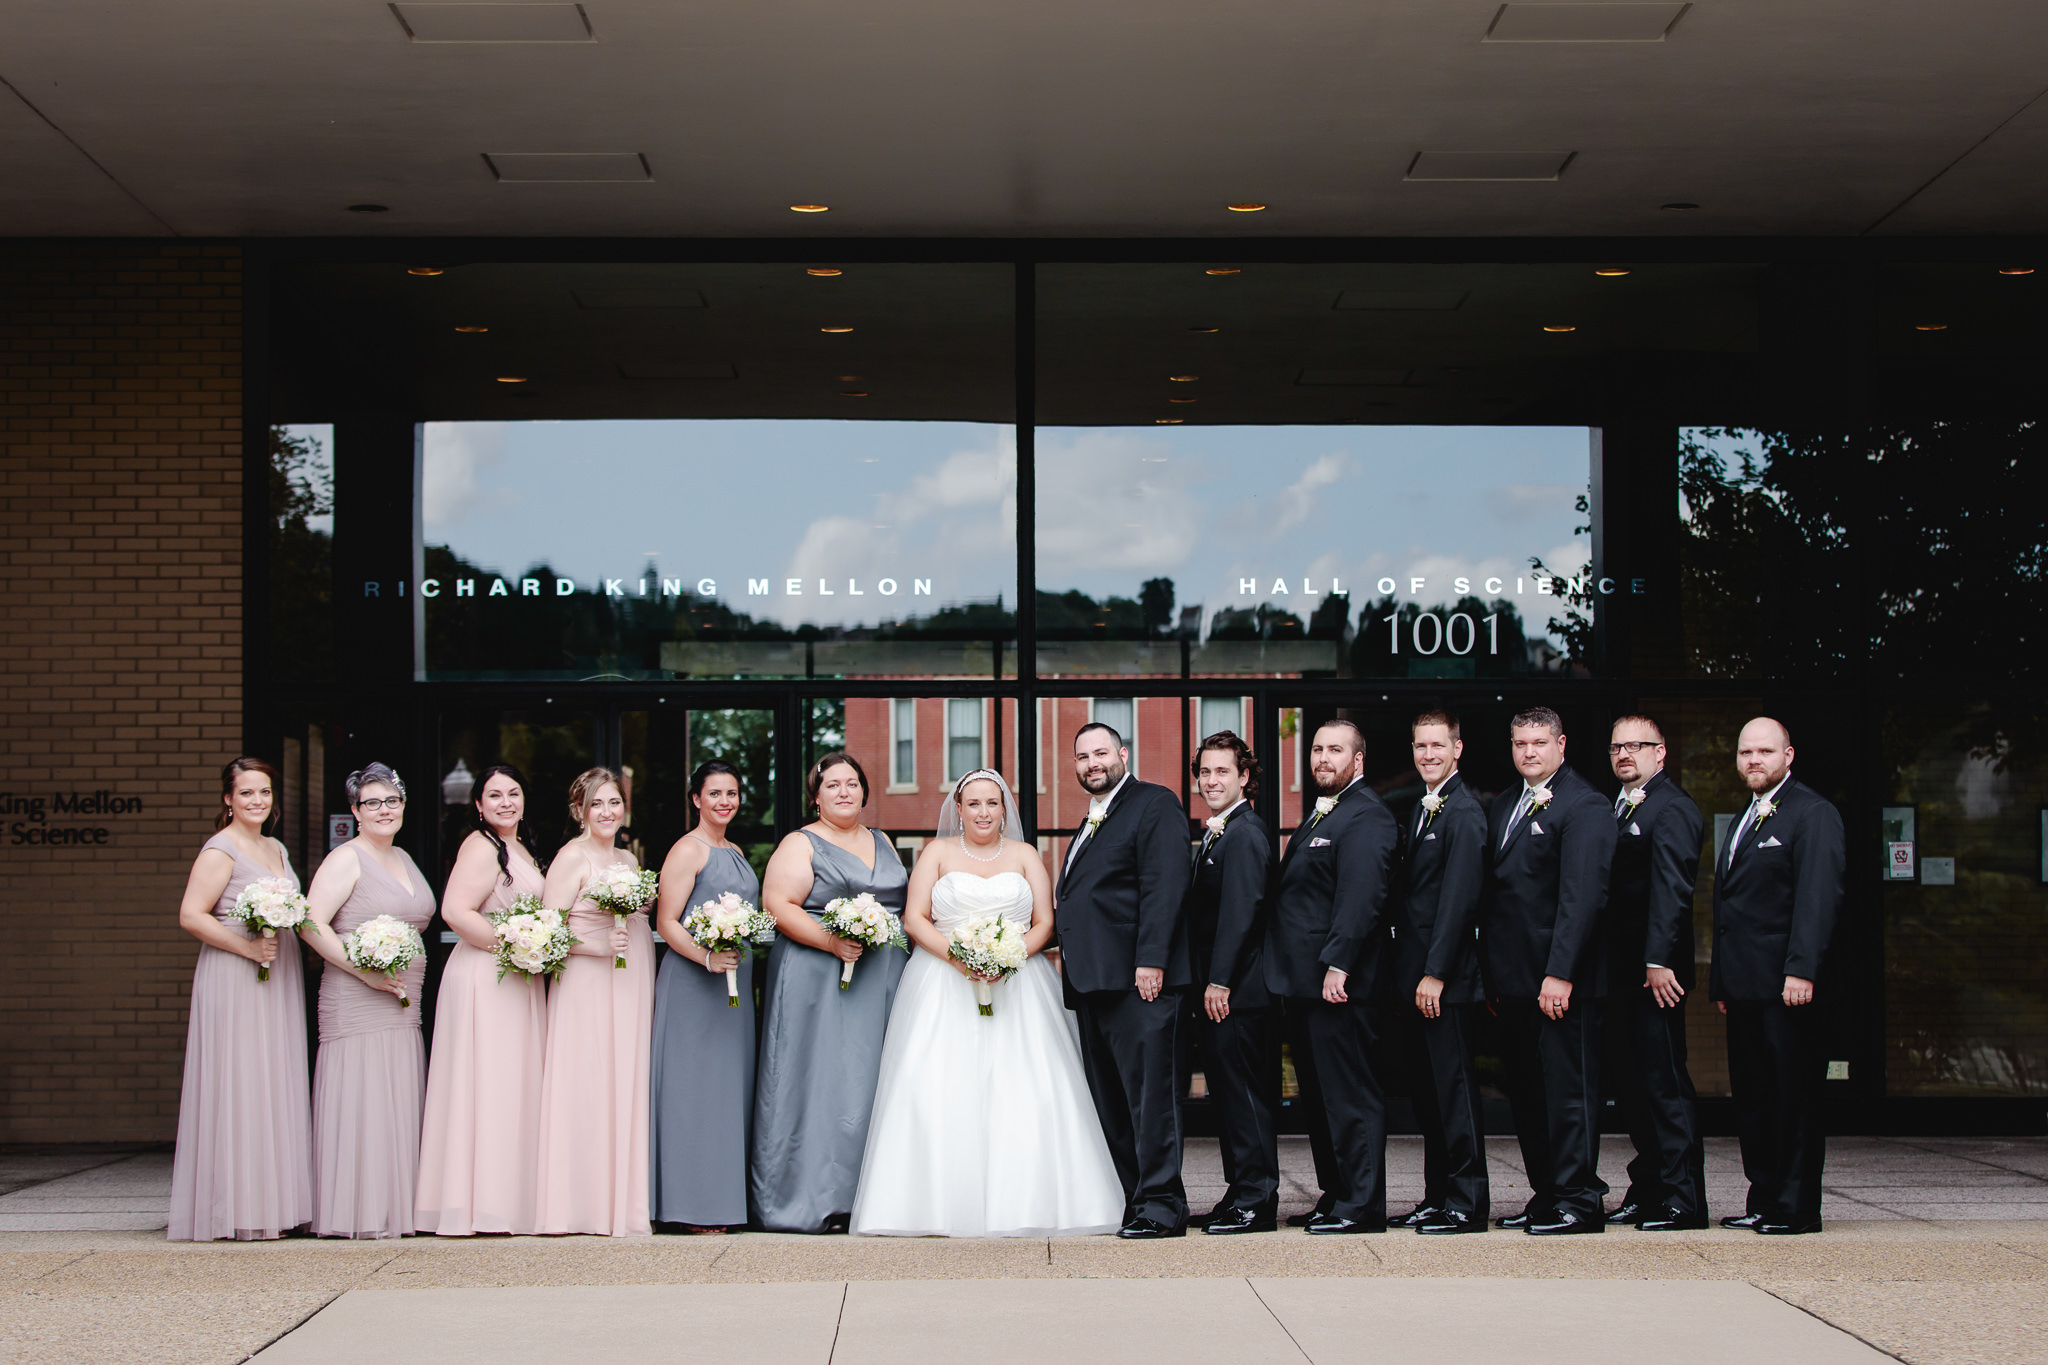 Bridal party poses for a group photos at Duquesne University